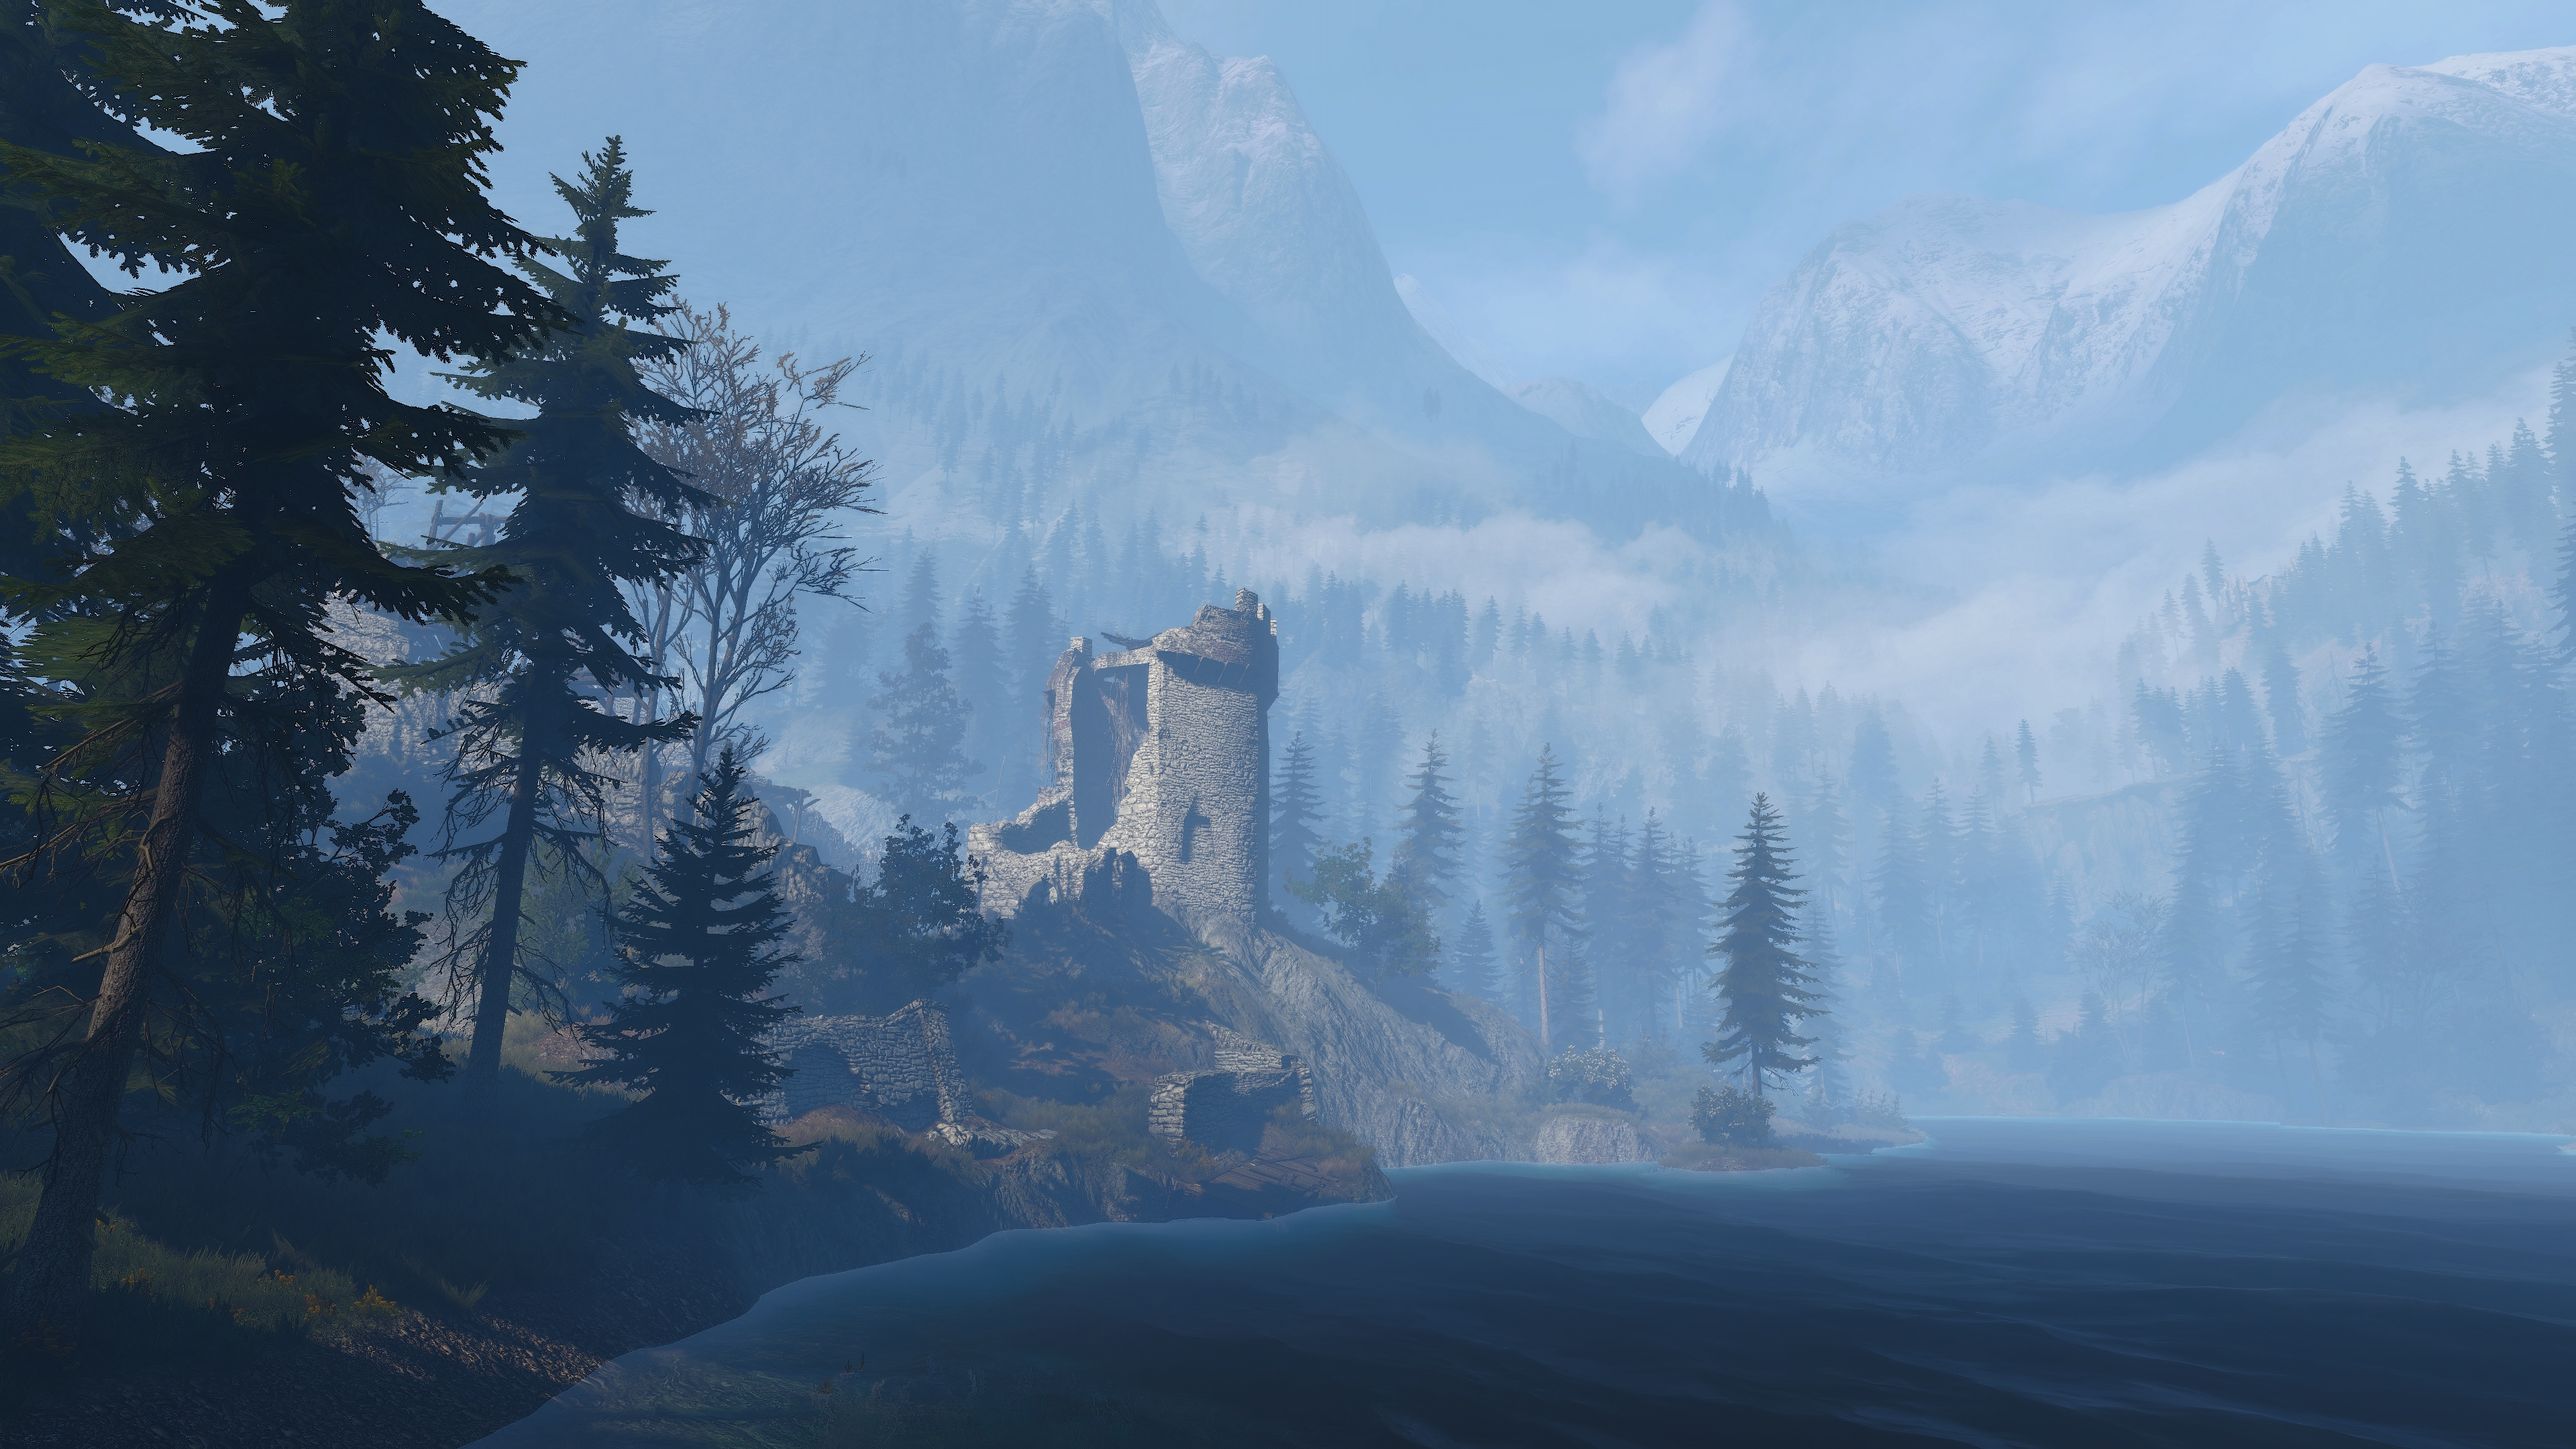 General 3840x2160 The Witcher 3: Wild Hunt PC gaming screen shot lake Kaer Morhen mist mountains ruins forest trees video game art water video games nature sky snow CGI